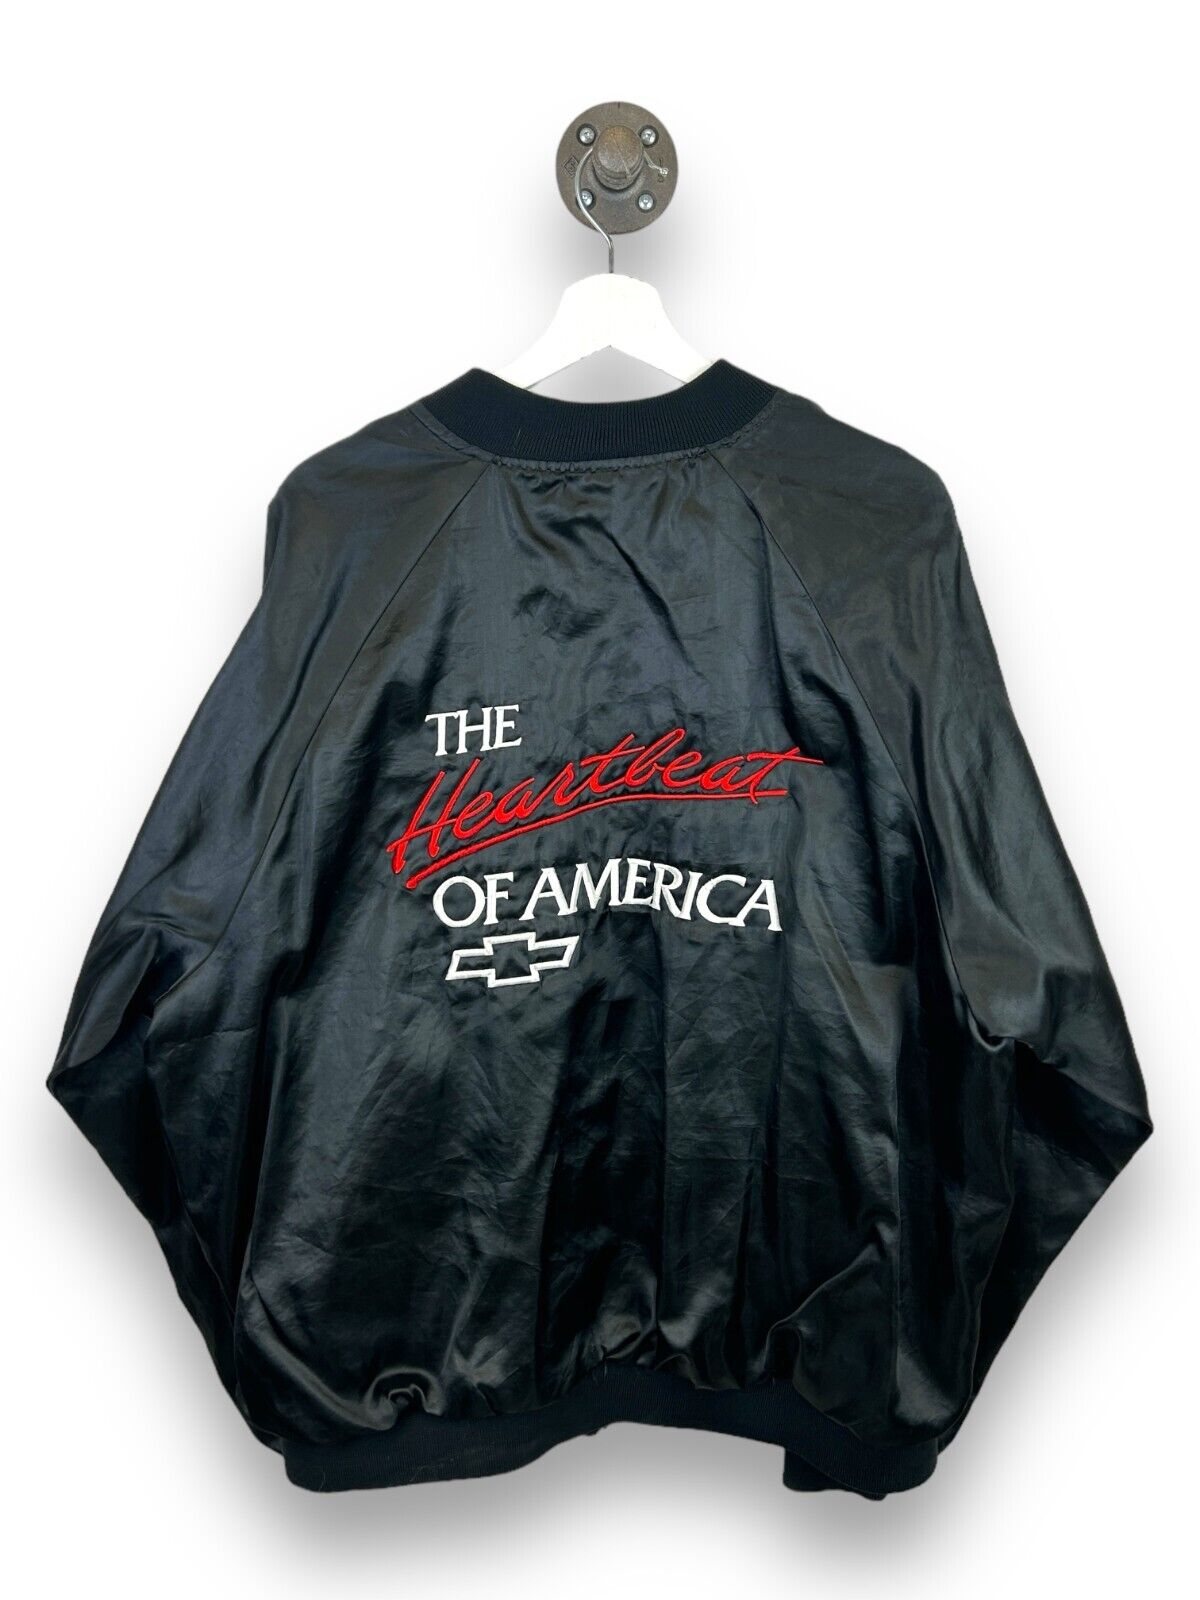 Vintage 80s/90s Chevrolet The Heartbeat Of America Satin Bomber Jacket Size 2XL